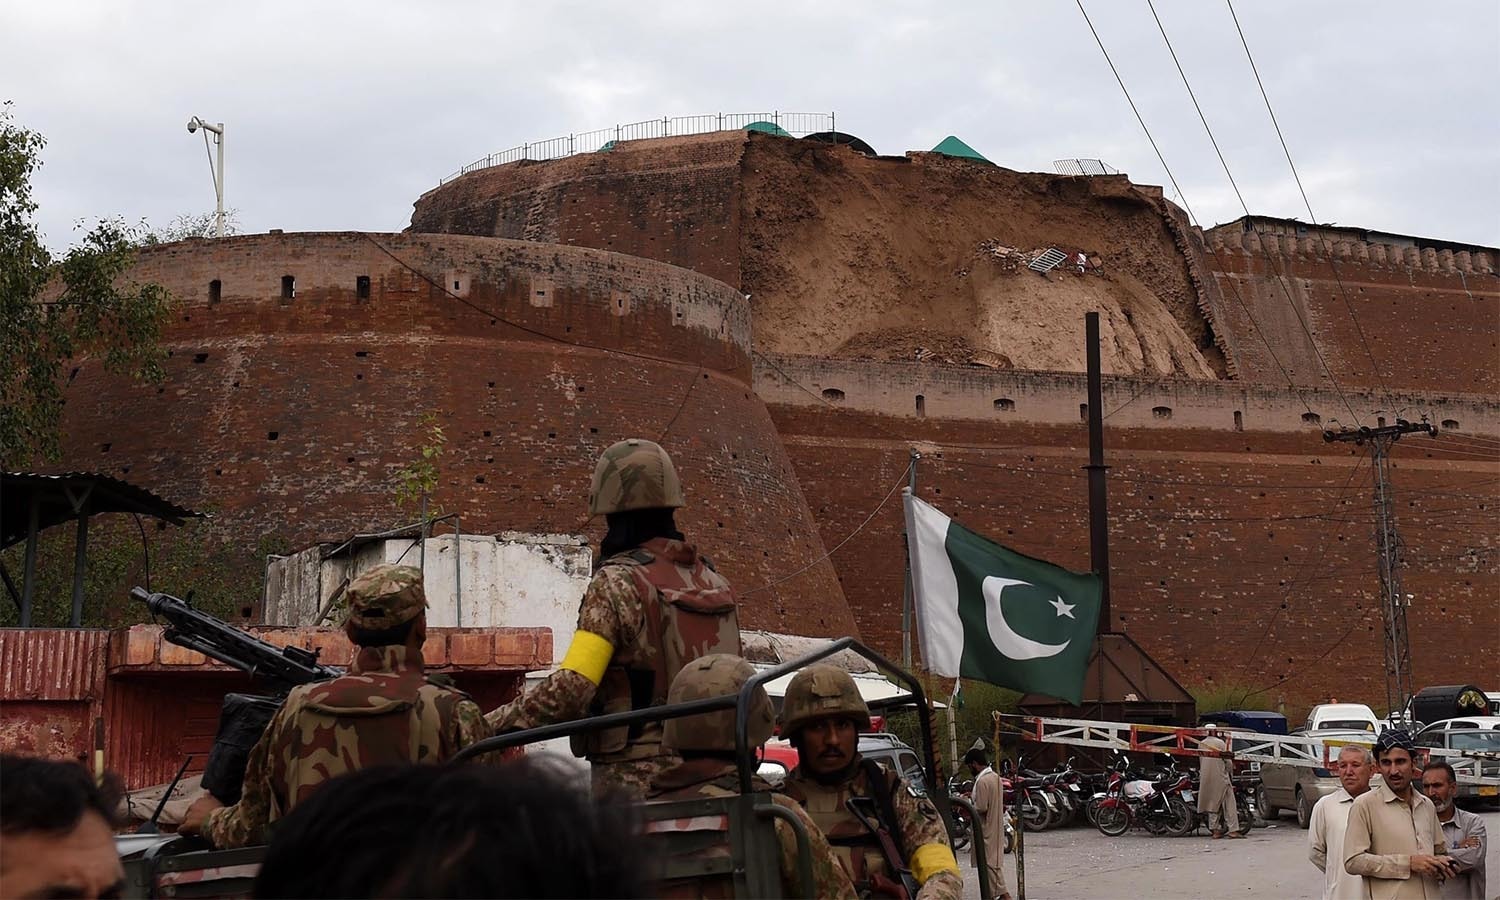 Pakistani paramilitary soldiers observe the damaged wall of a fort used by security forces after an earthquake in Peshawar on October 26, 2015. At least 17 people including eight children were killed in Pakistan when a 7.5 magnitude quake struck in Afghanistan October 26, officials said. AFP PHOTO / A MAJEED